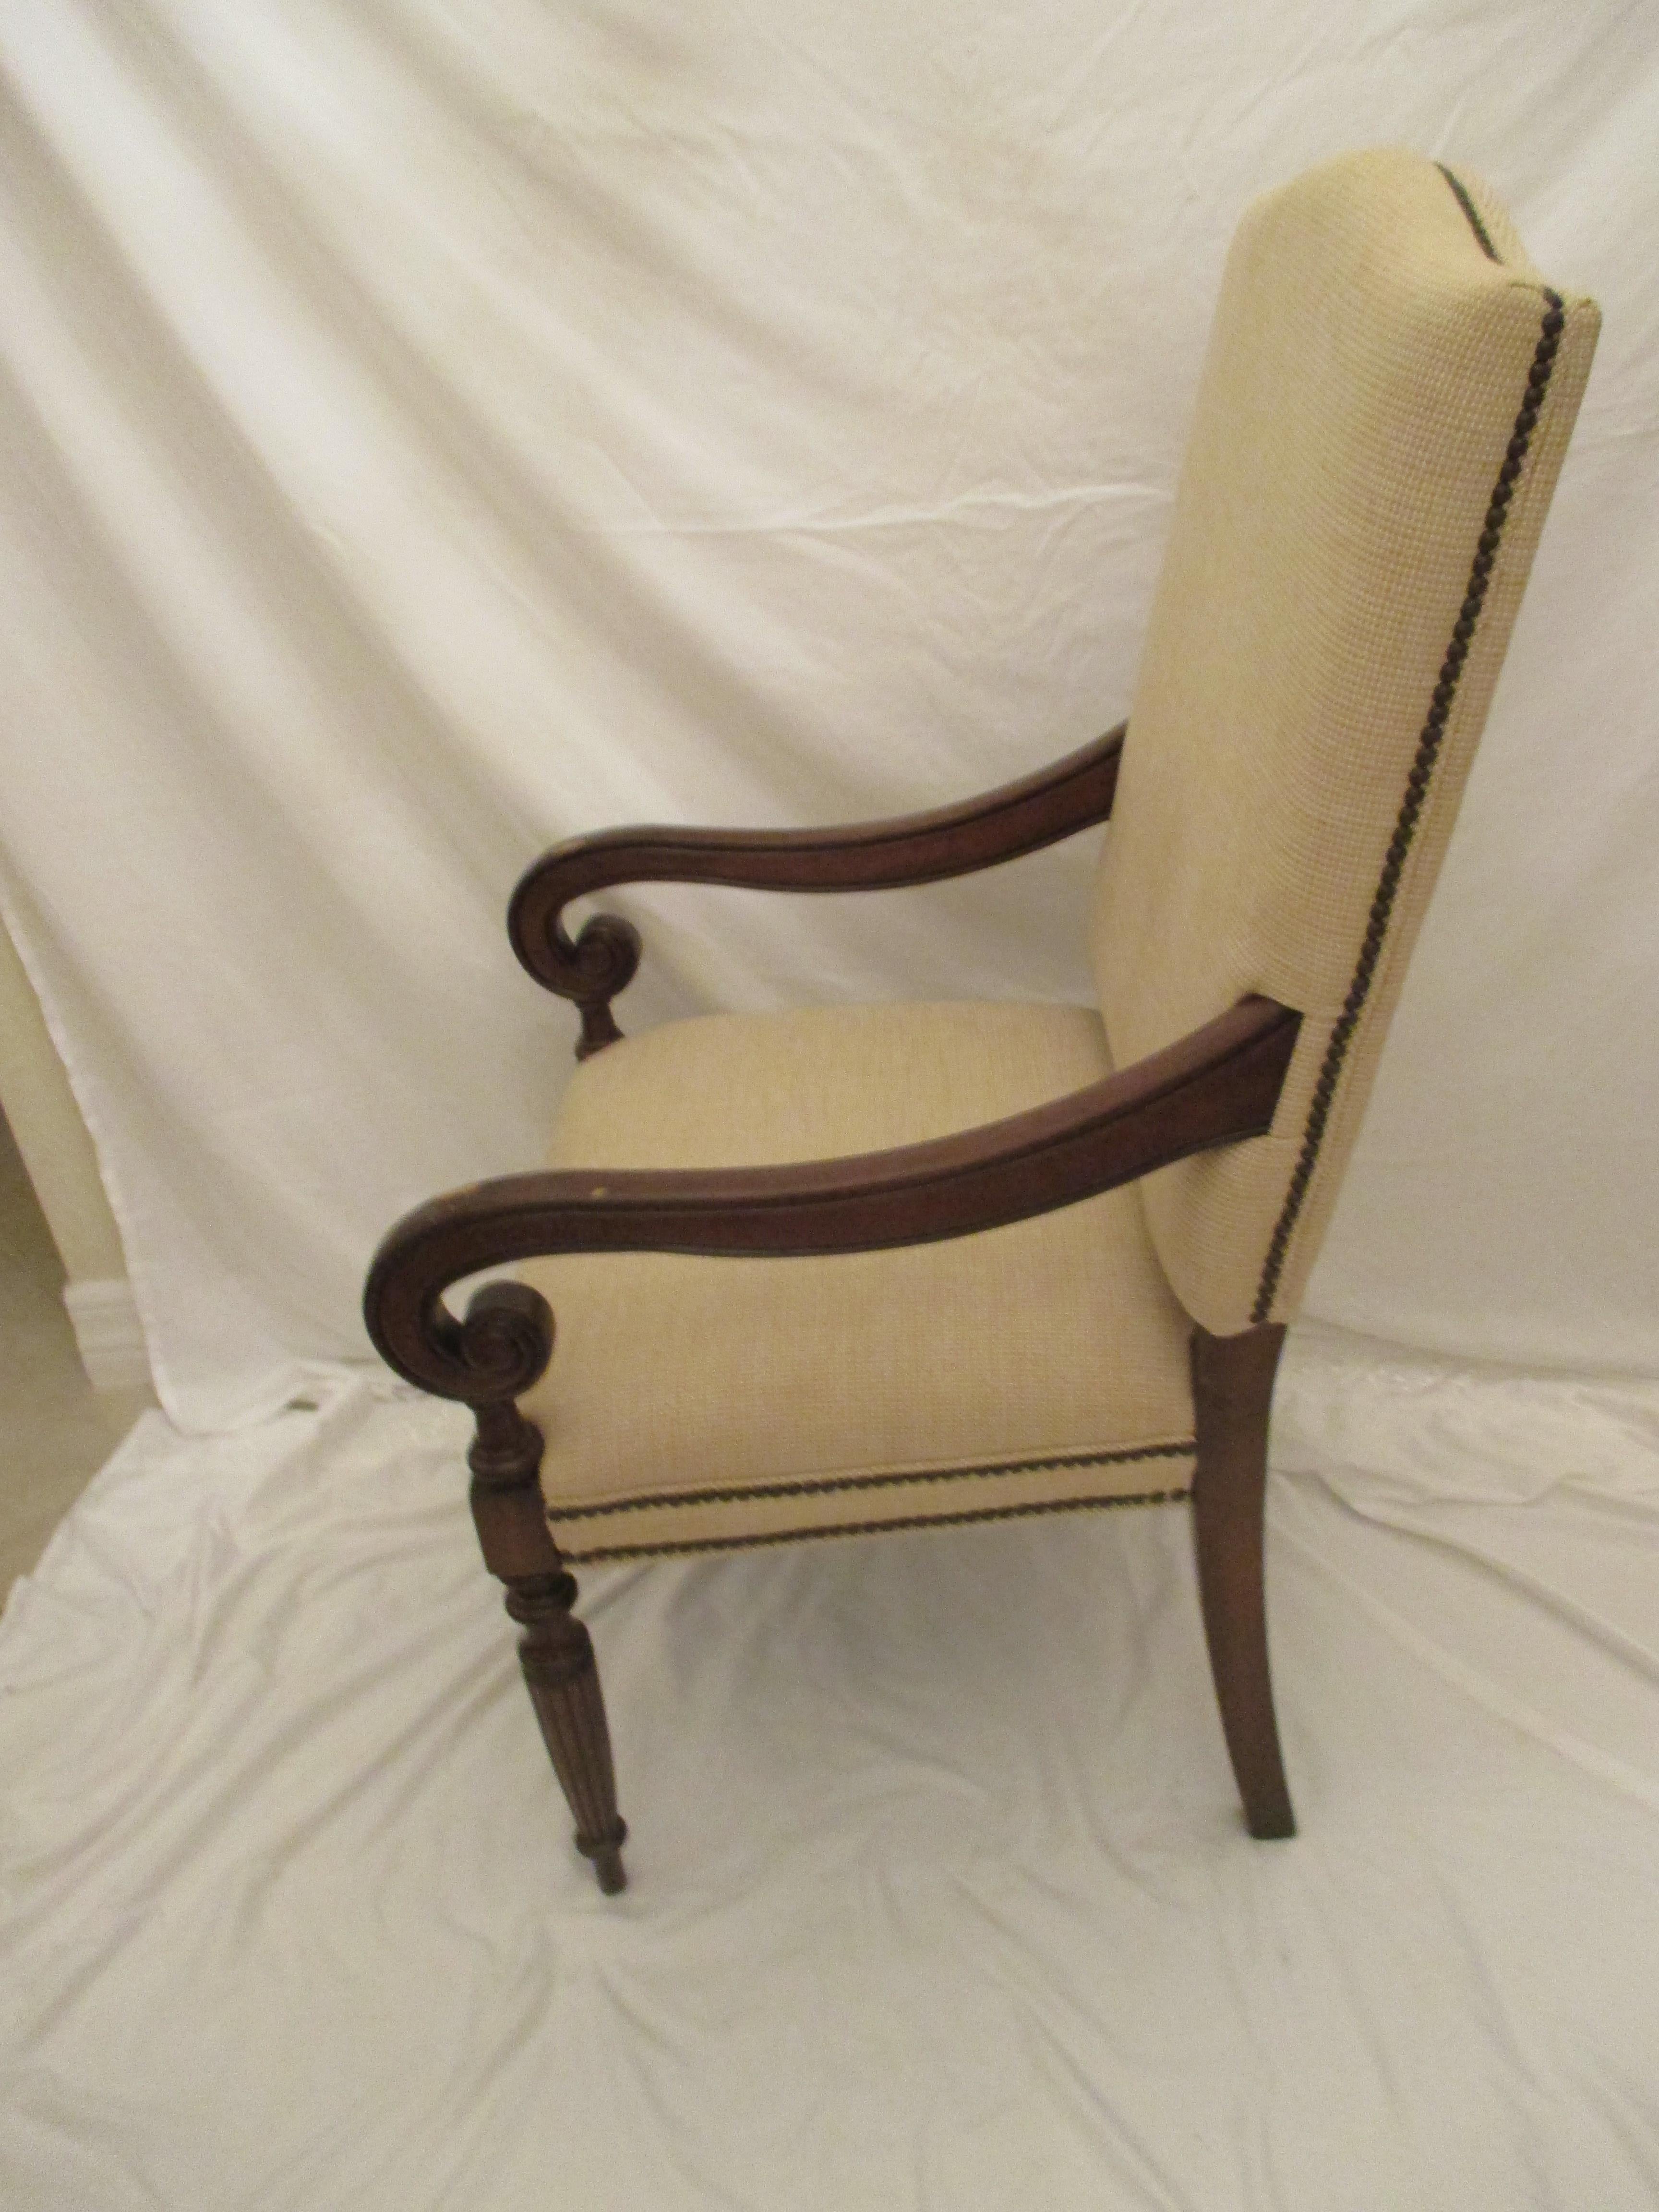 Tall upholstered club chair with arms. Chair has original upholstery in good condition with nailhead trim. Arms have signs of wear. Measurements are listed, however, floor to arm measurement is 26.75.”